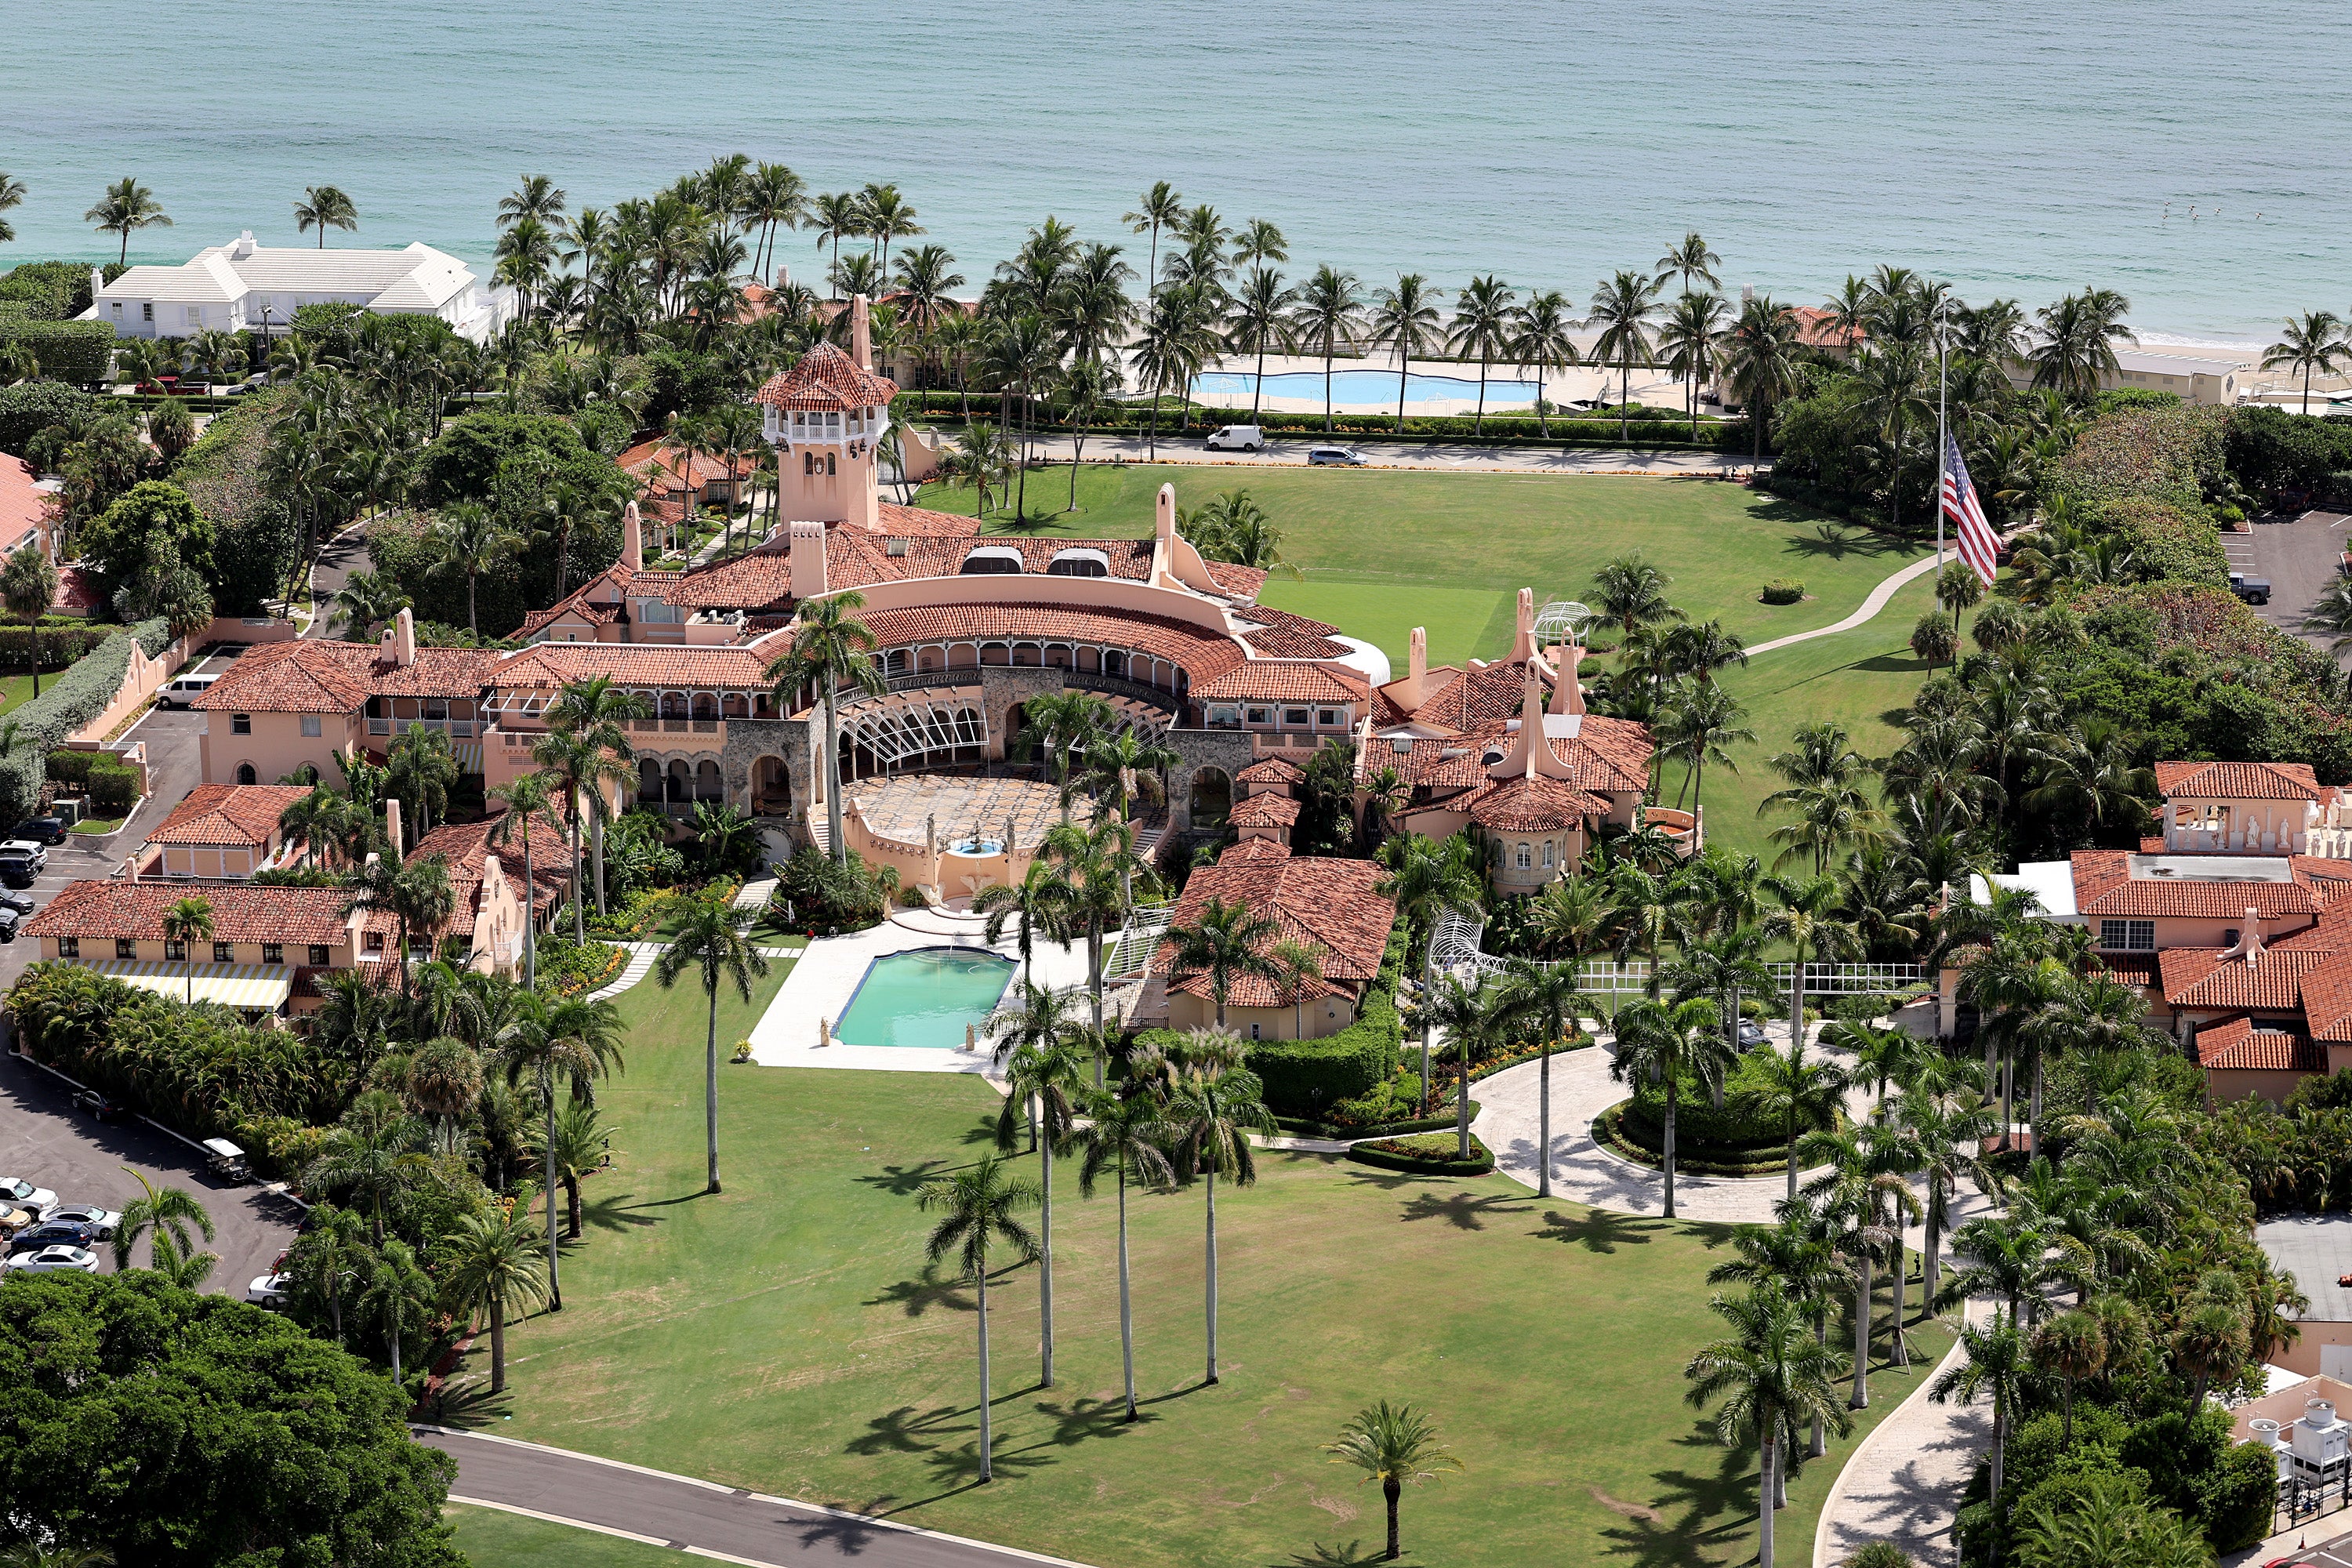 Trump’s sprawling Mar-a-Lago state in Flordia was raided in August 2022